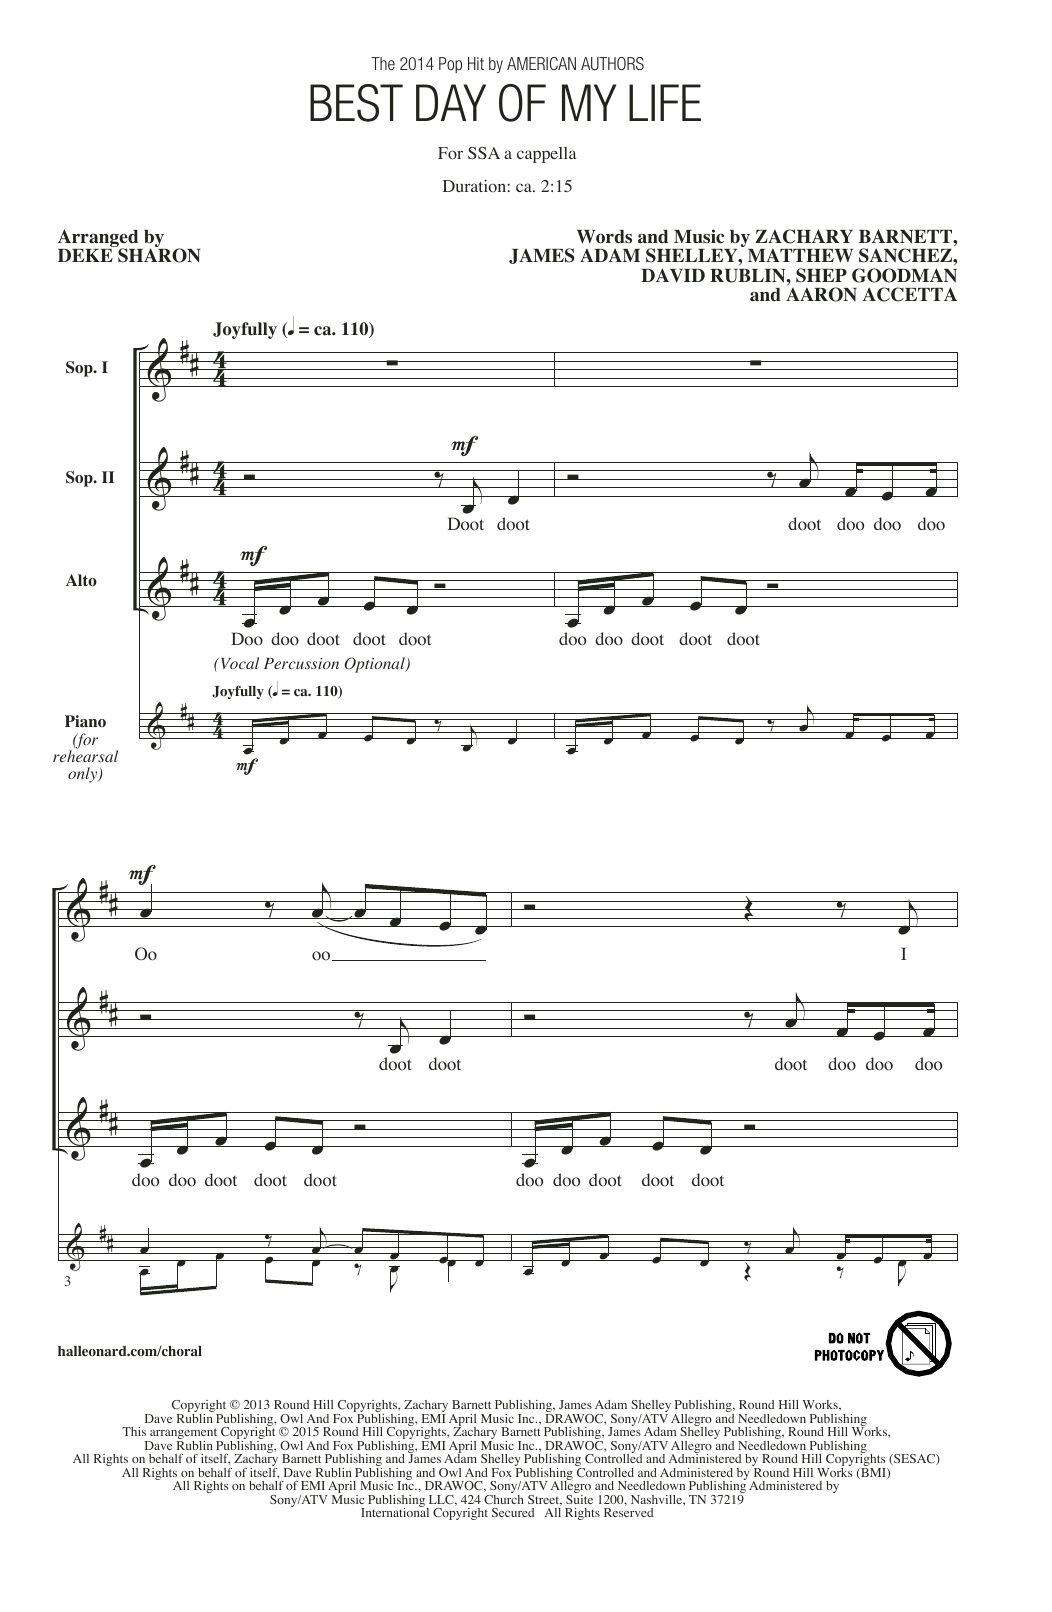 American Authors Best Day Of My Life (arr. Deke Sharon) sheet music notes and chords - Download Printable PDF and start playing in minutes.